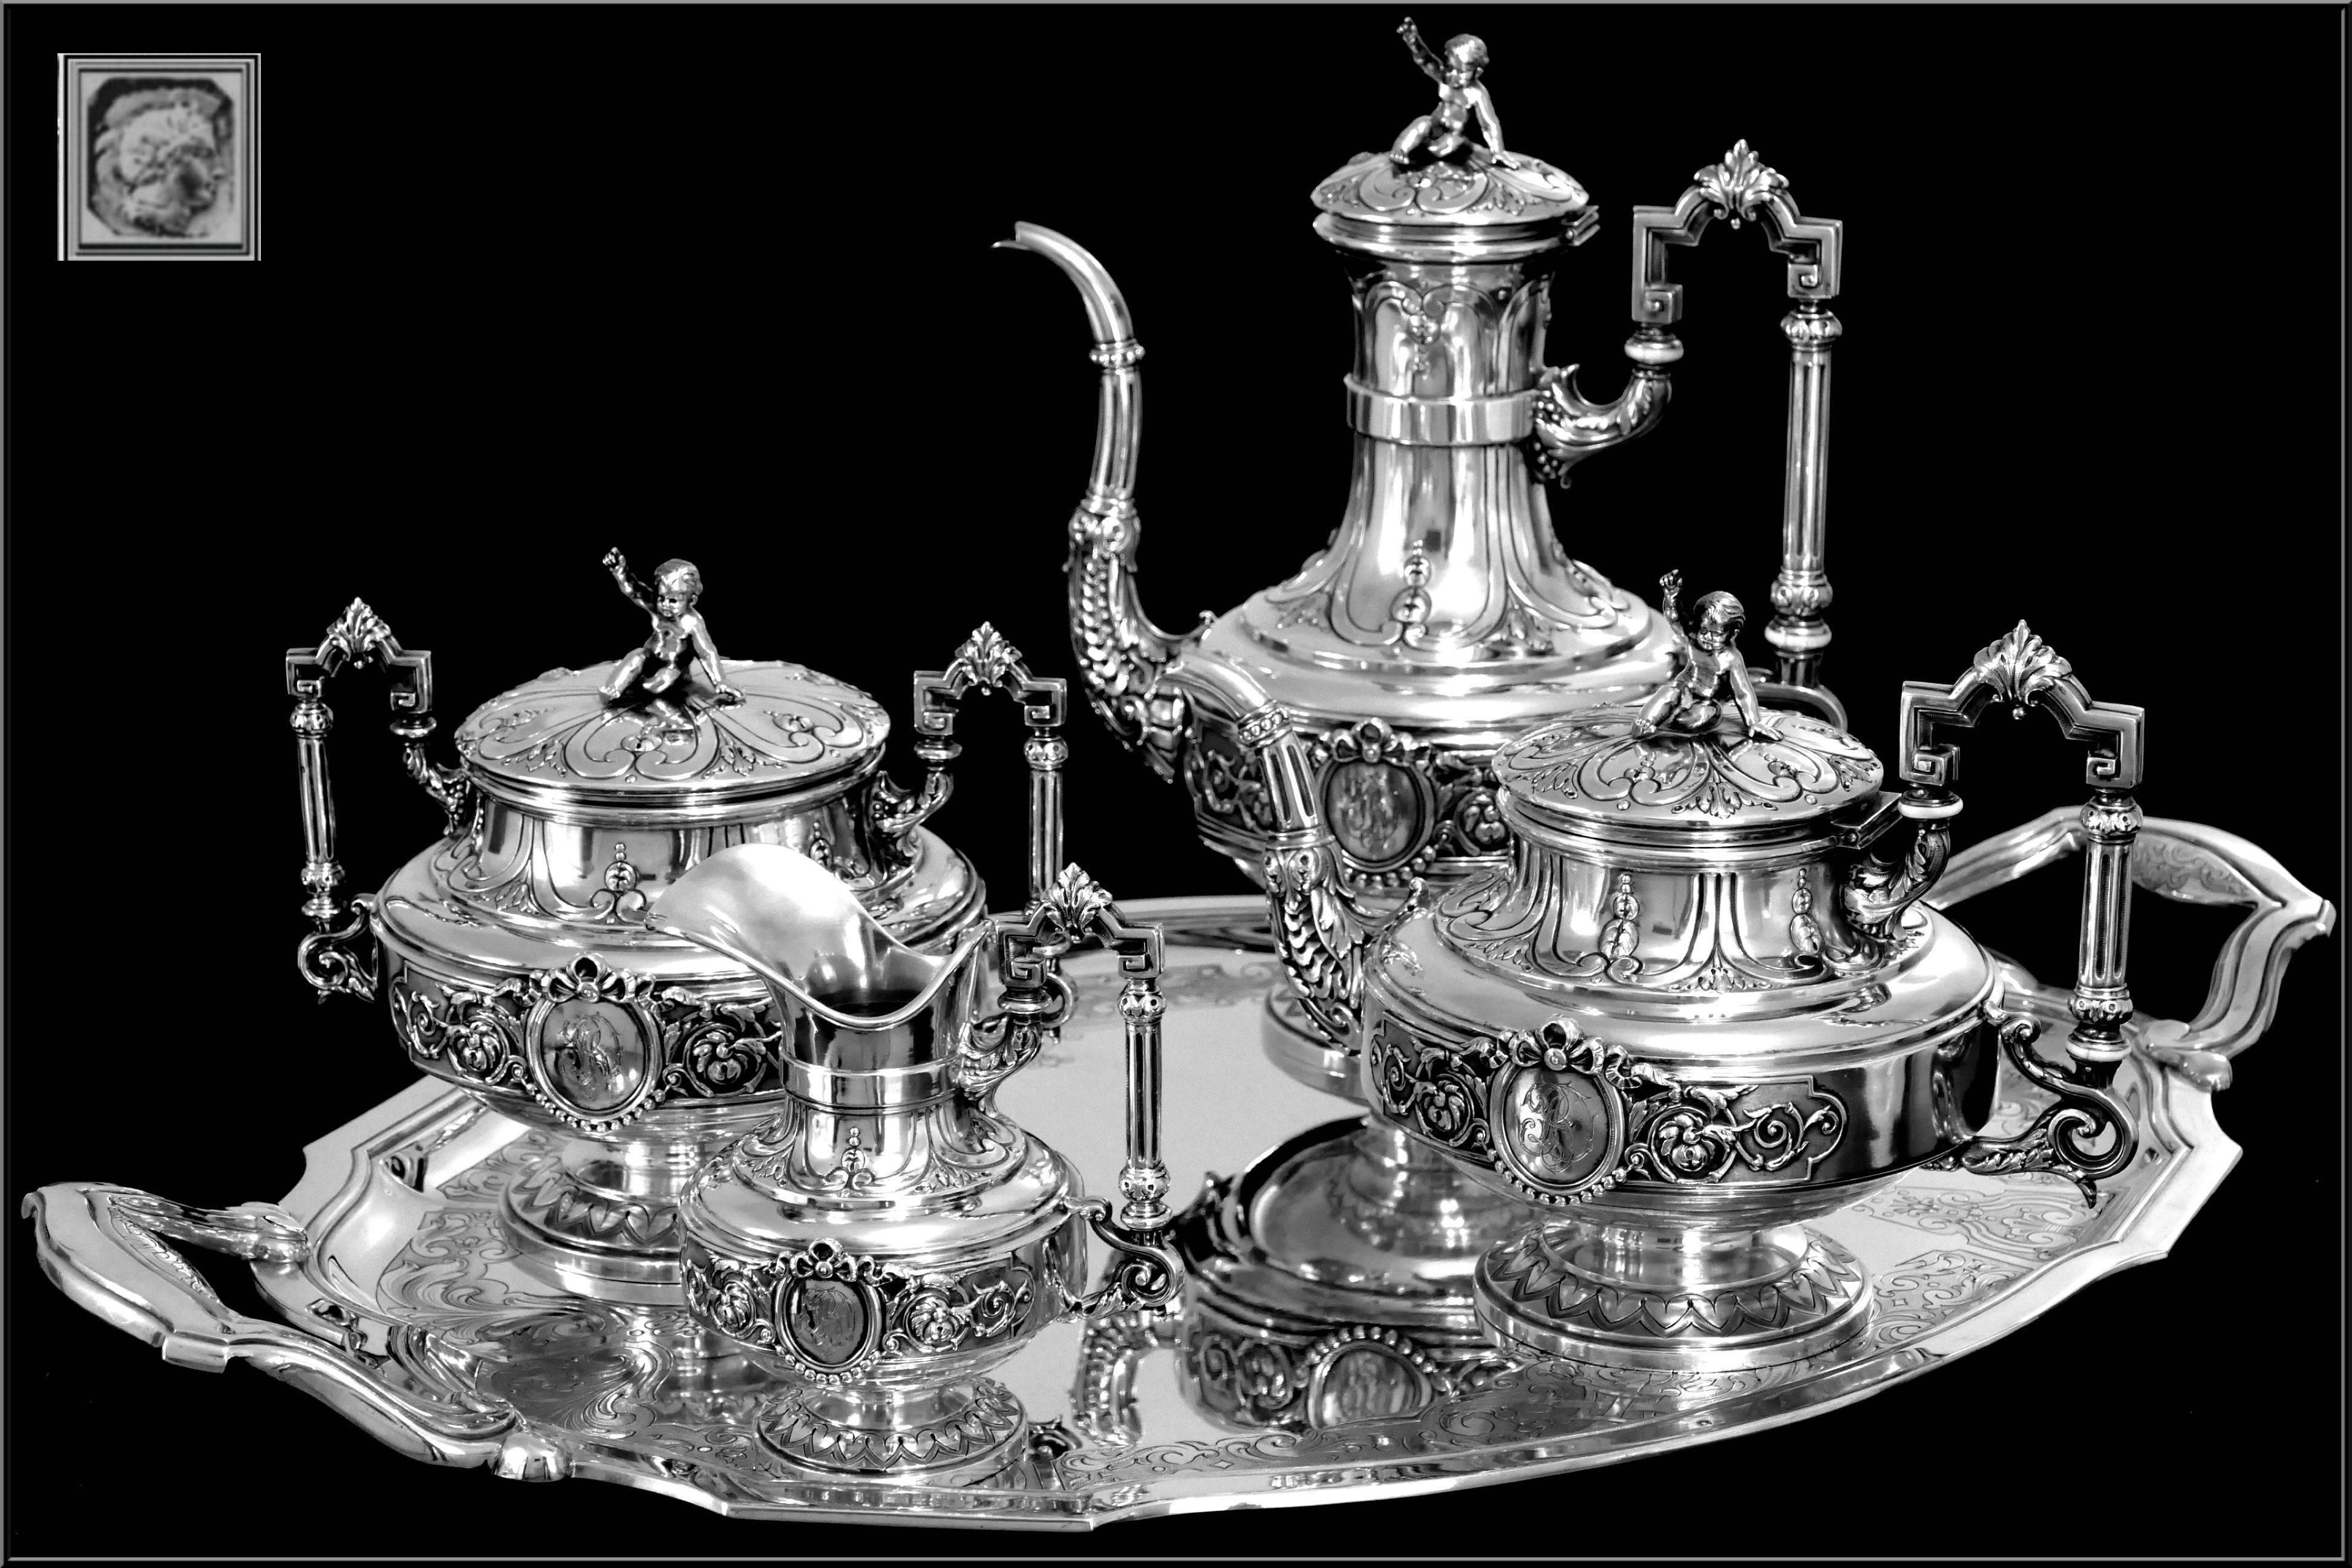 Neoclassical Boulenger Fabulous French All Sterling Silver Tea & Coffee Service 5 pc Putti